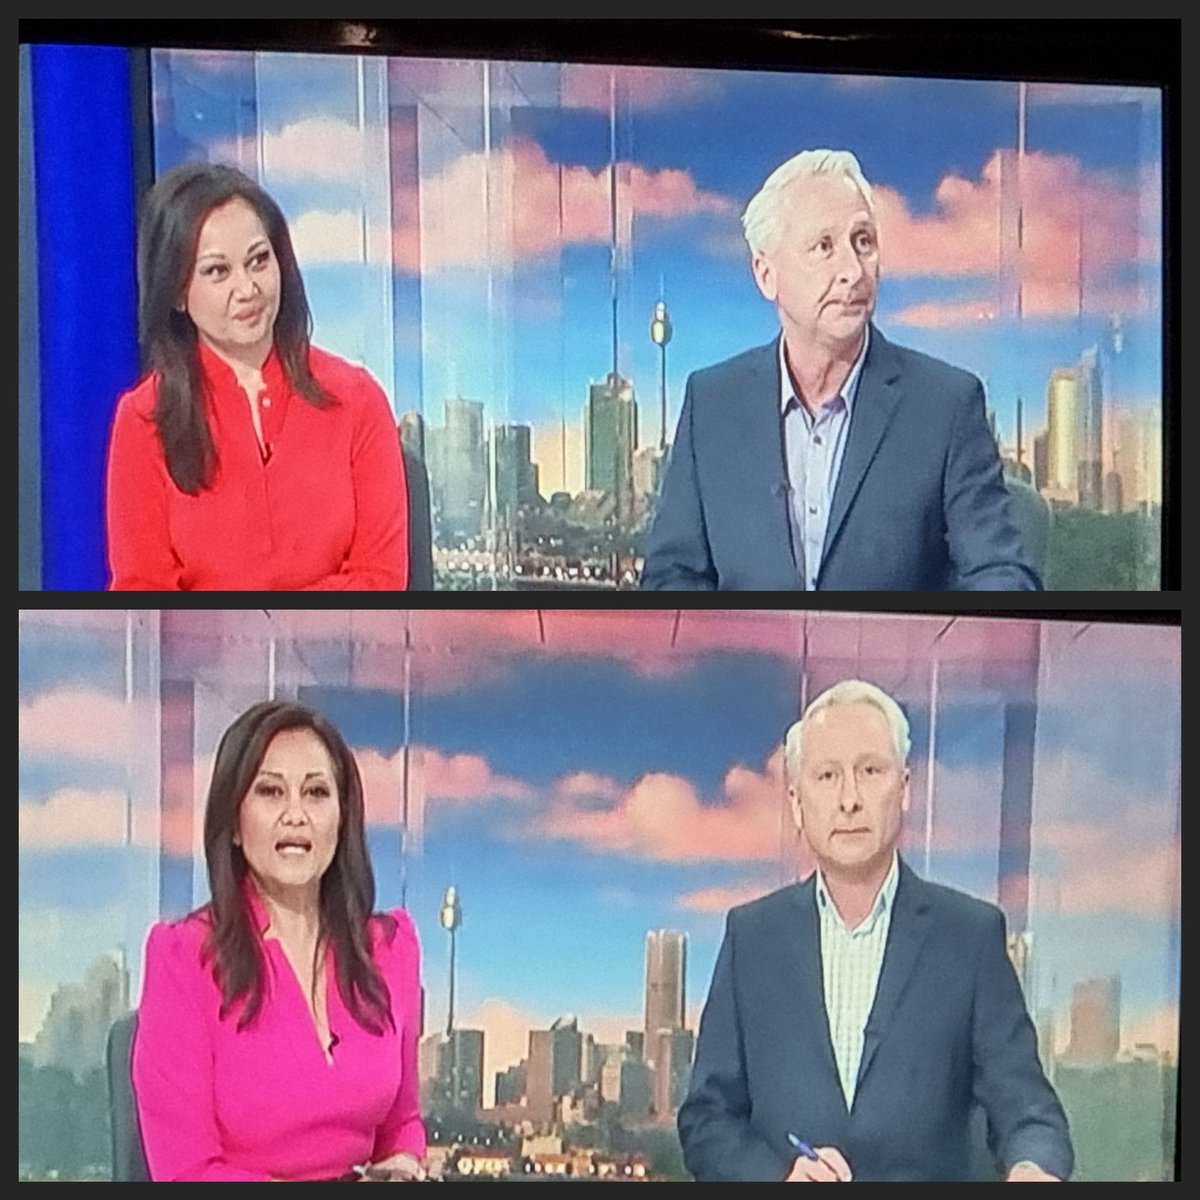 A double dose of #GregJennett on the weekend means two things,
Overtime or being kicked out of #AfternoonBriefing now.

#auspol @ABCmediawatch #ABCNews